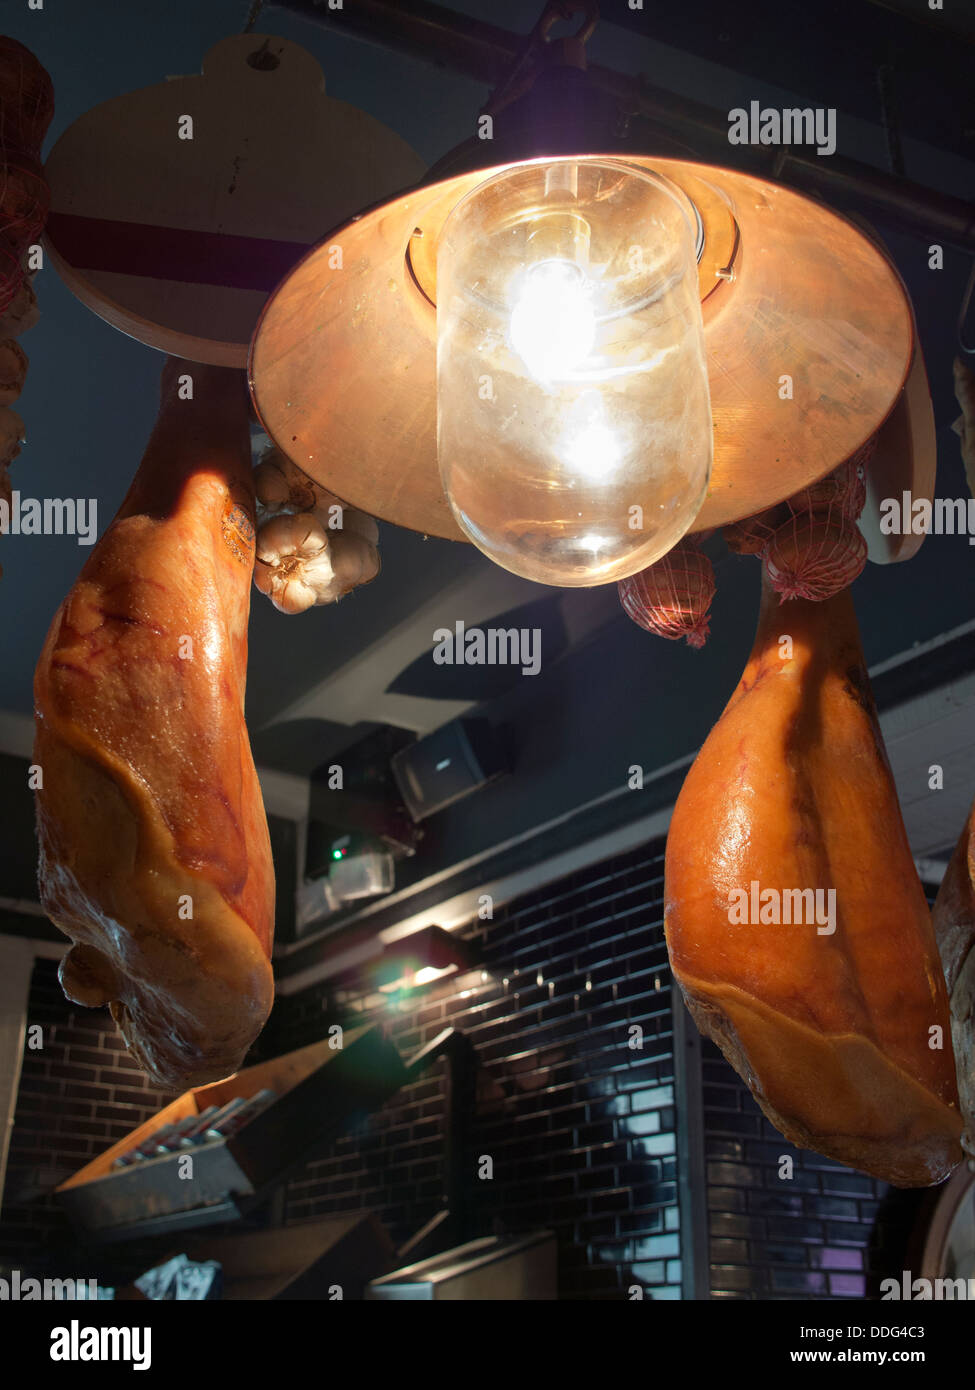 Suspended hams in an Italian Restaurant in Oxford, England 3 Stock Photo